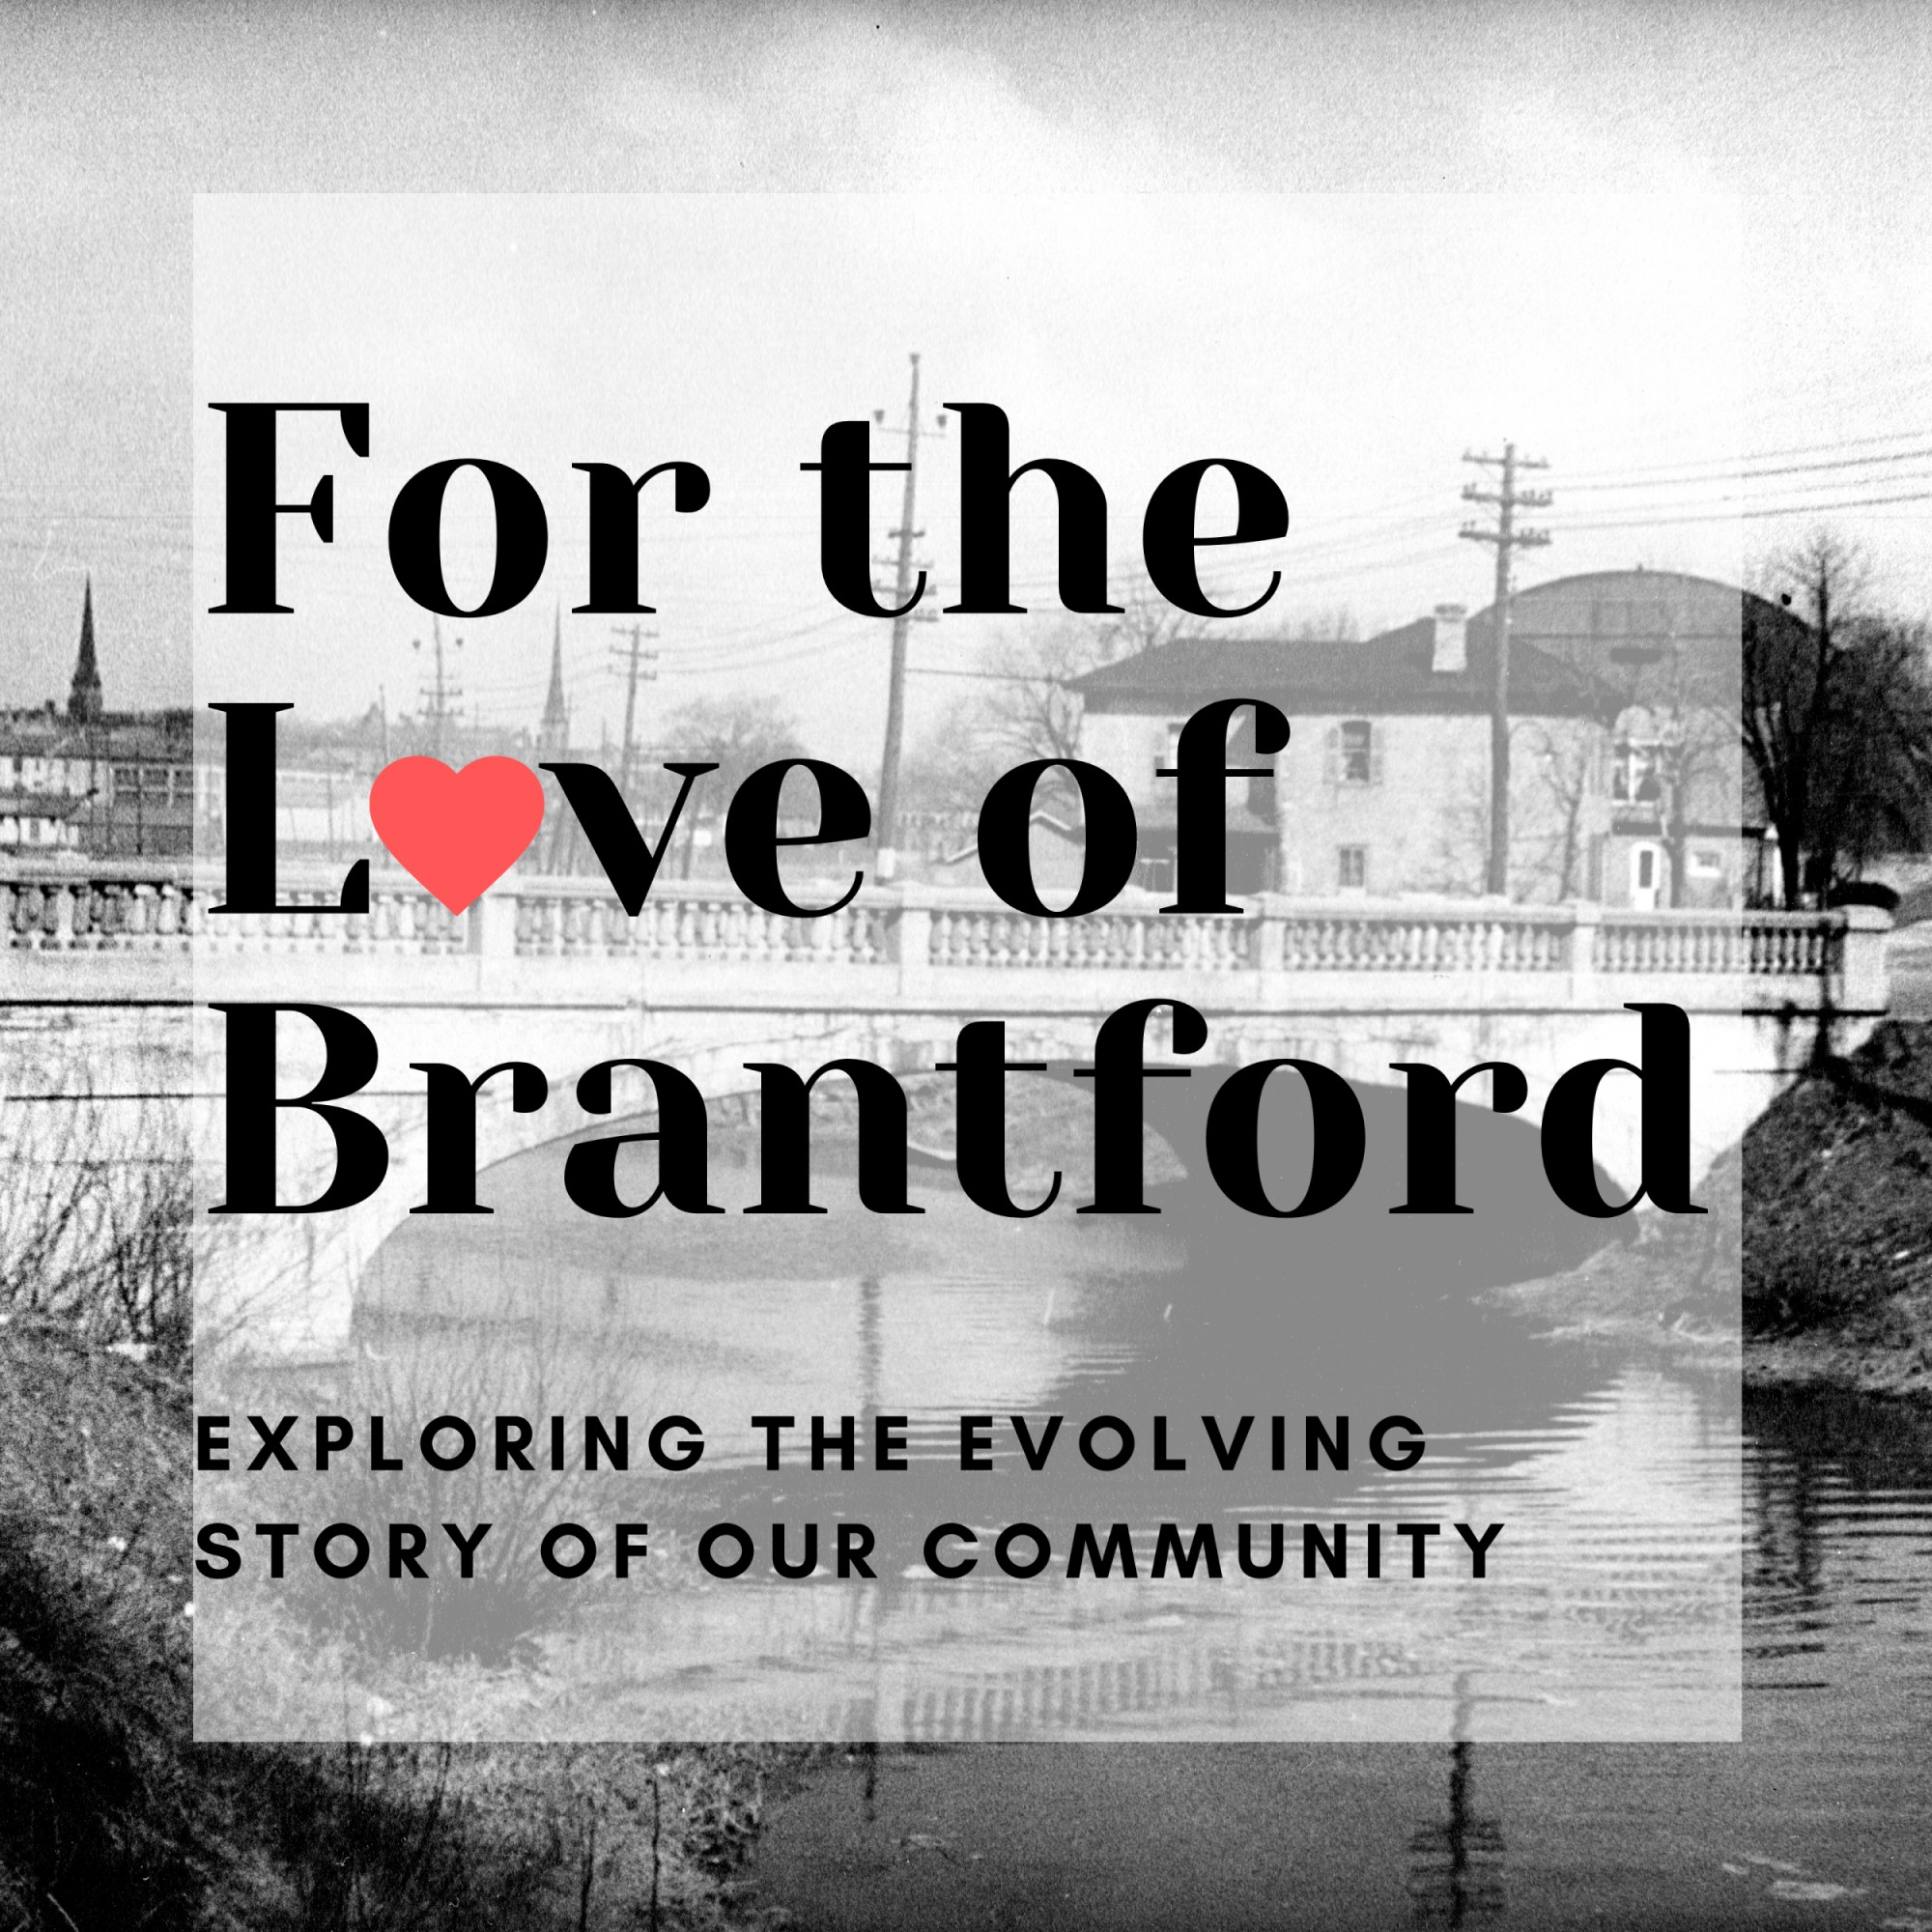 For the Love of Brantford